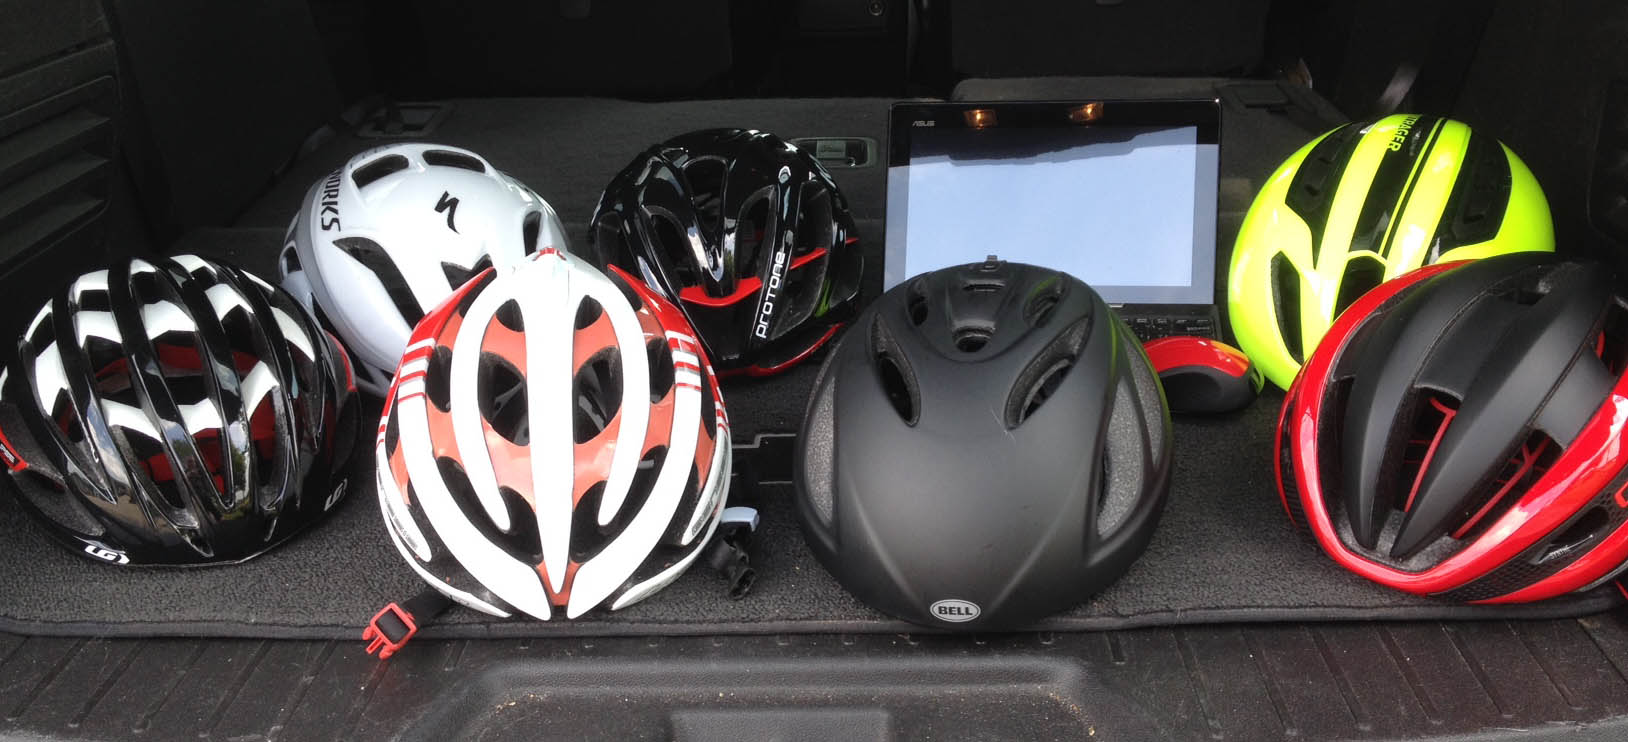 Specialized Evade II aims to make aero helmets cool - Velo